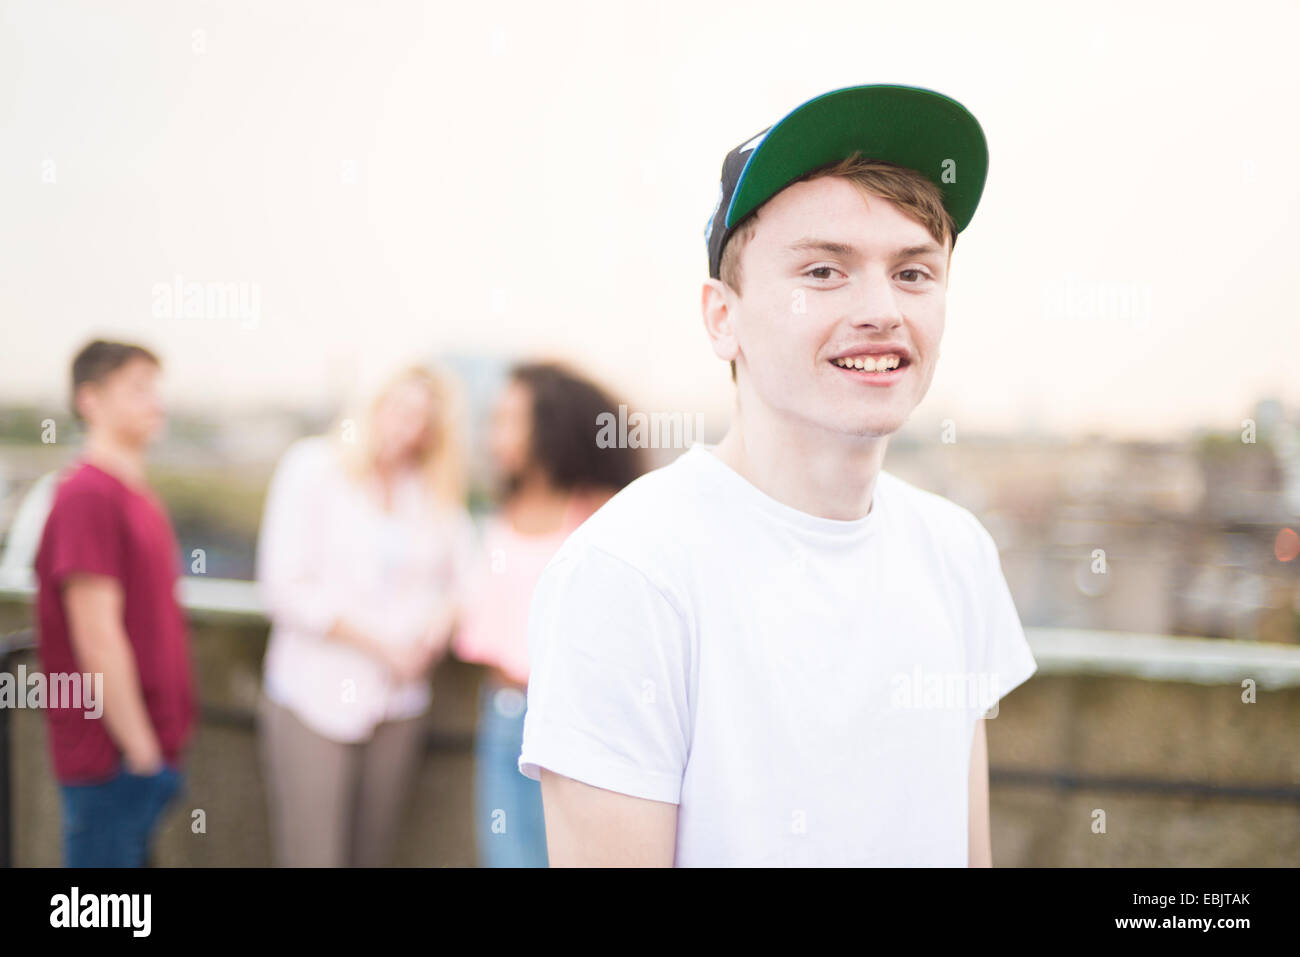 Teenage Boy Wearing Hat High Resolution Stock Photography and Images - Alamy